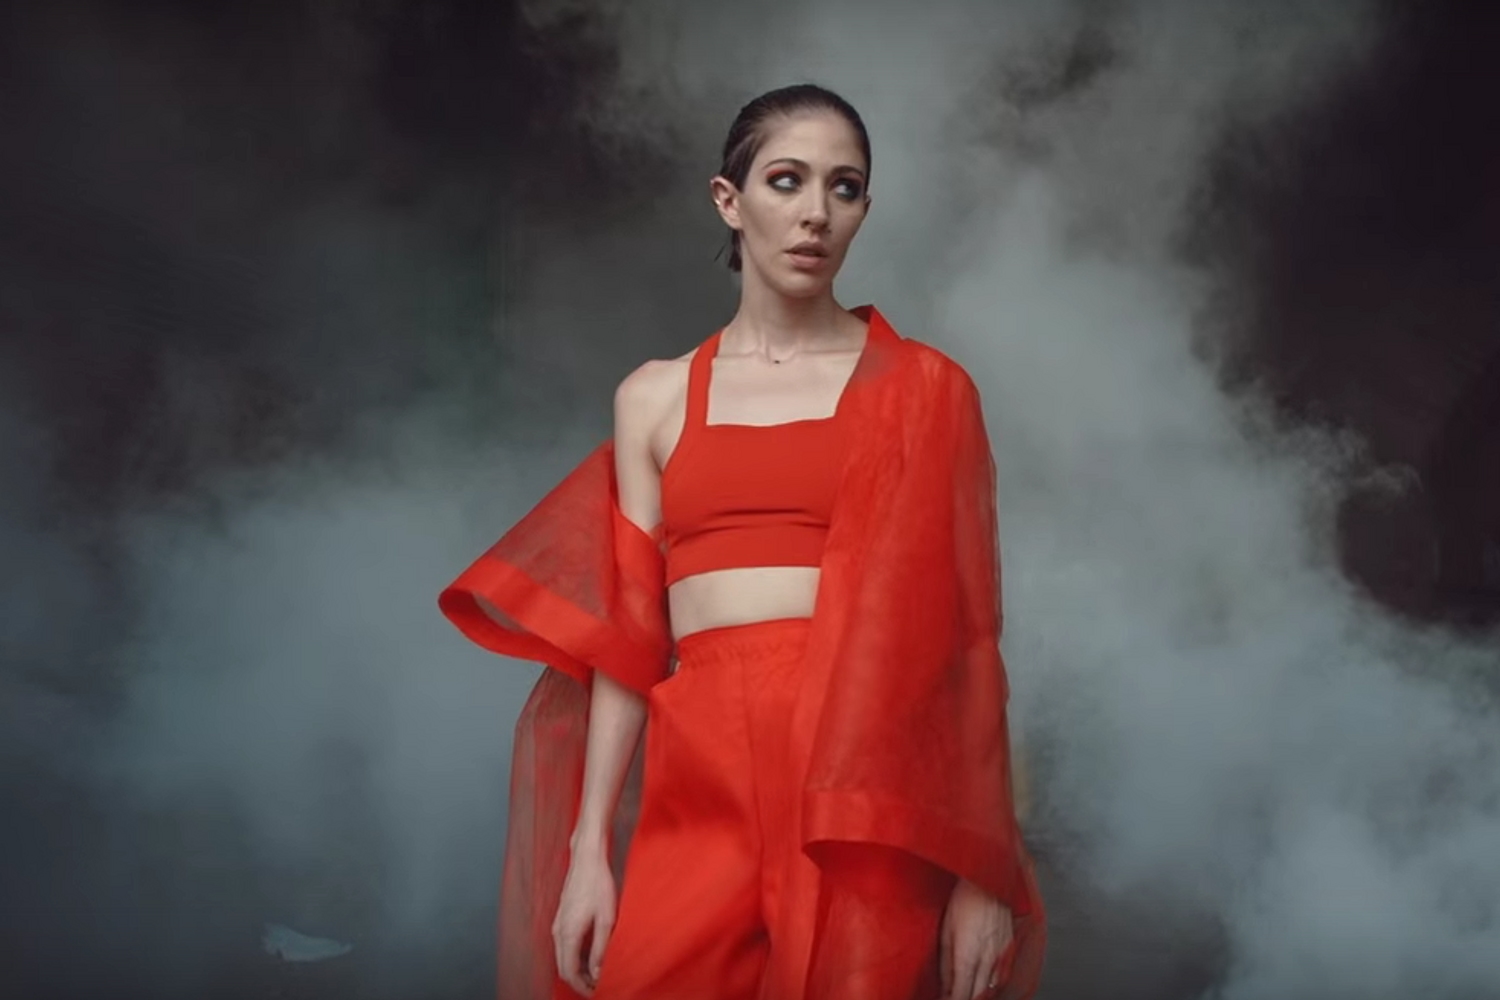 Chairlift air ‘Ch-Ching’ video